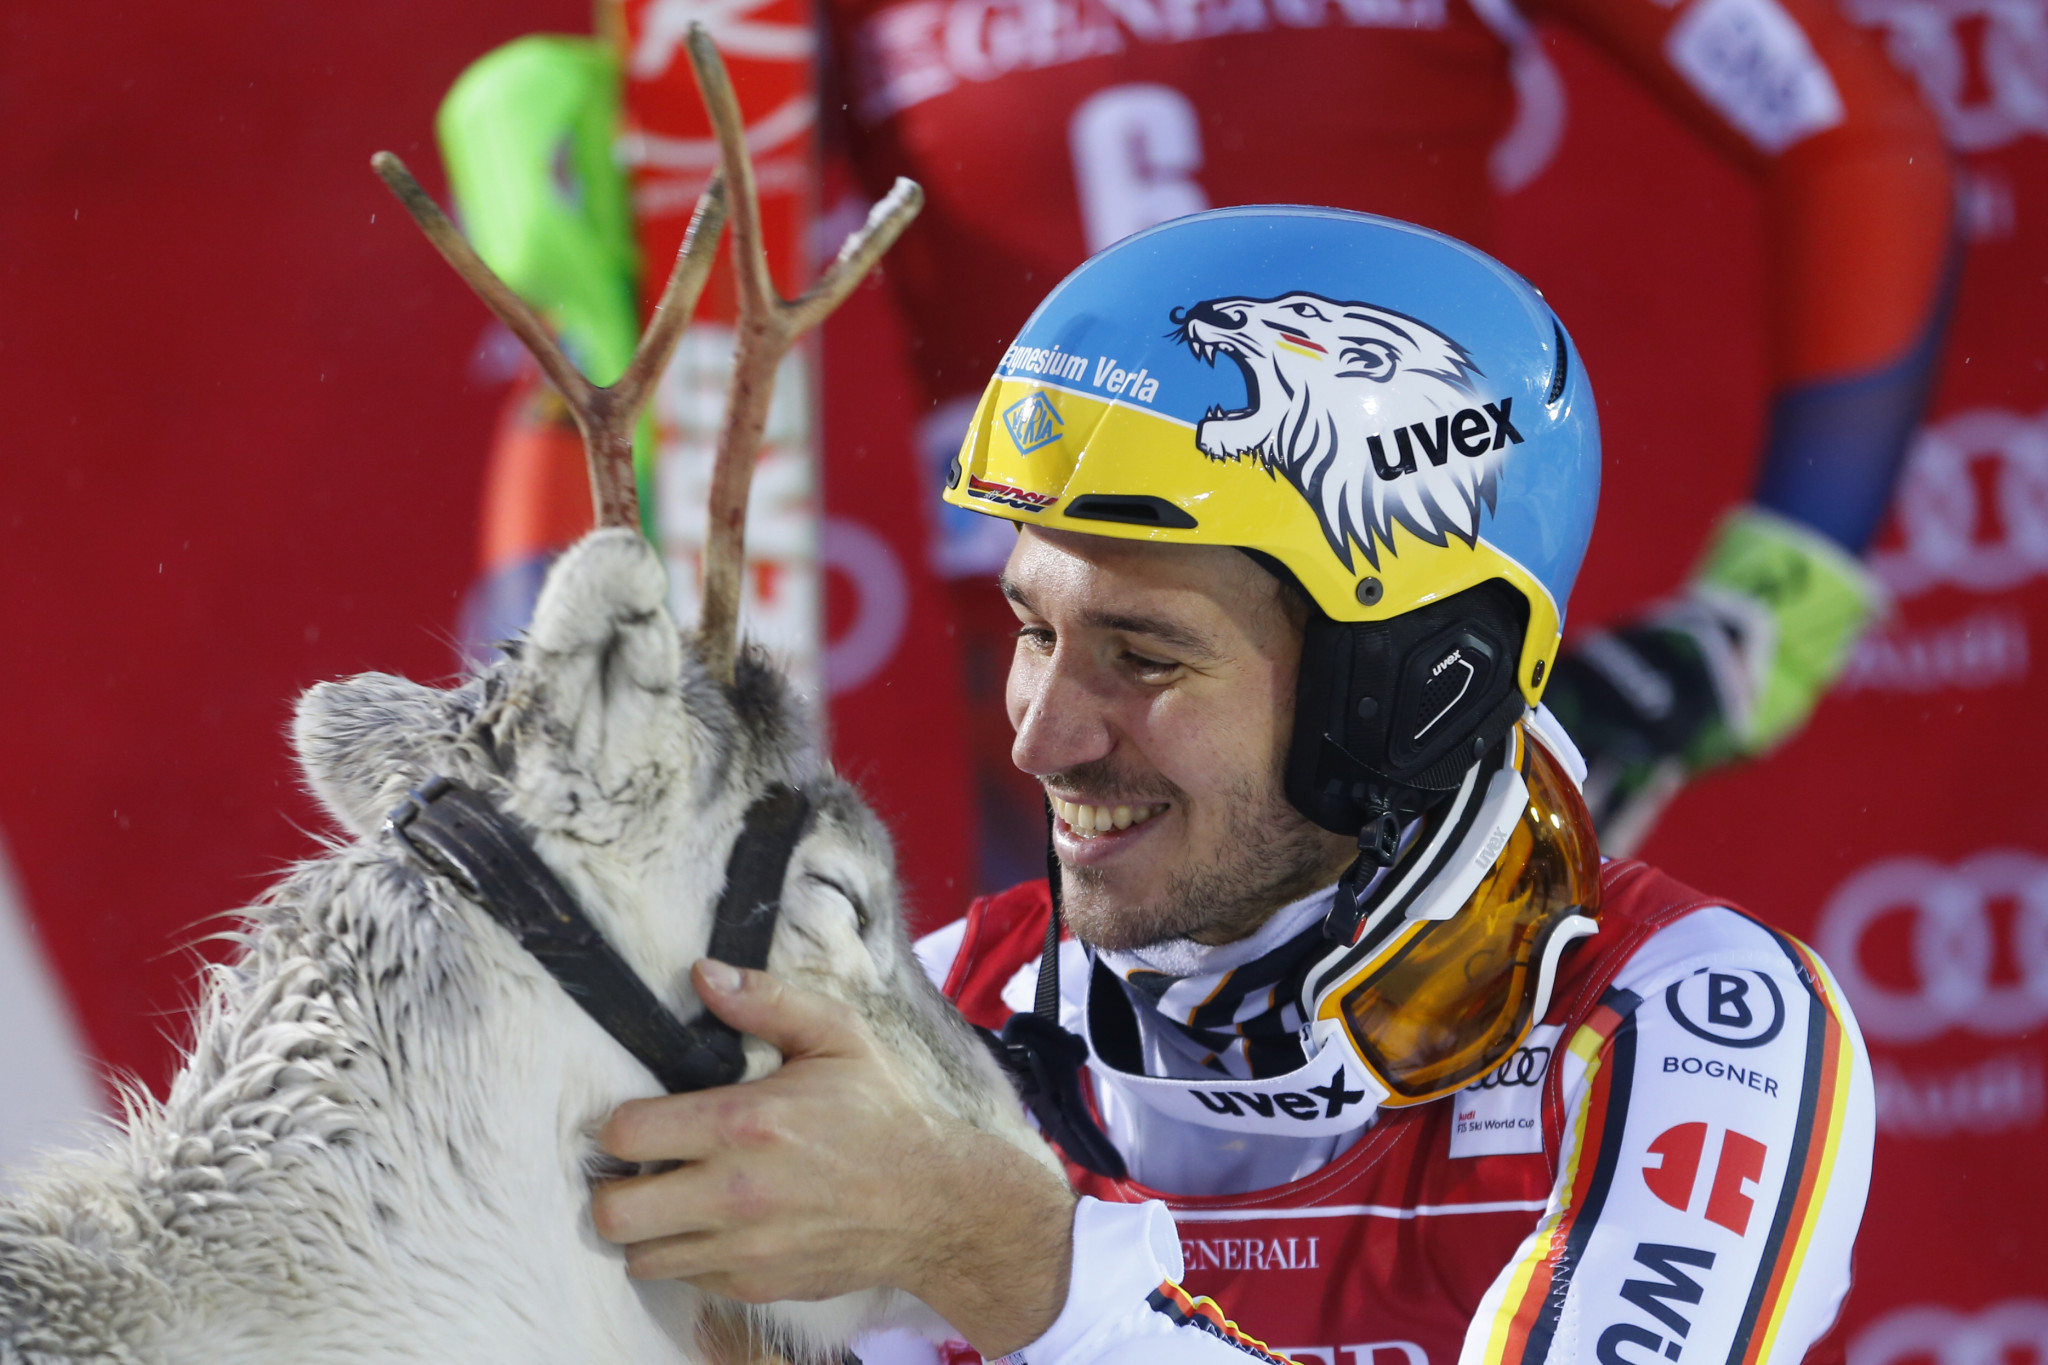 Felix Neureuther won a reindeer after his slalom World Cup victory ©Getty Images